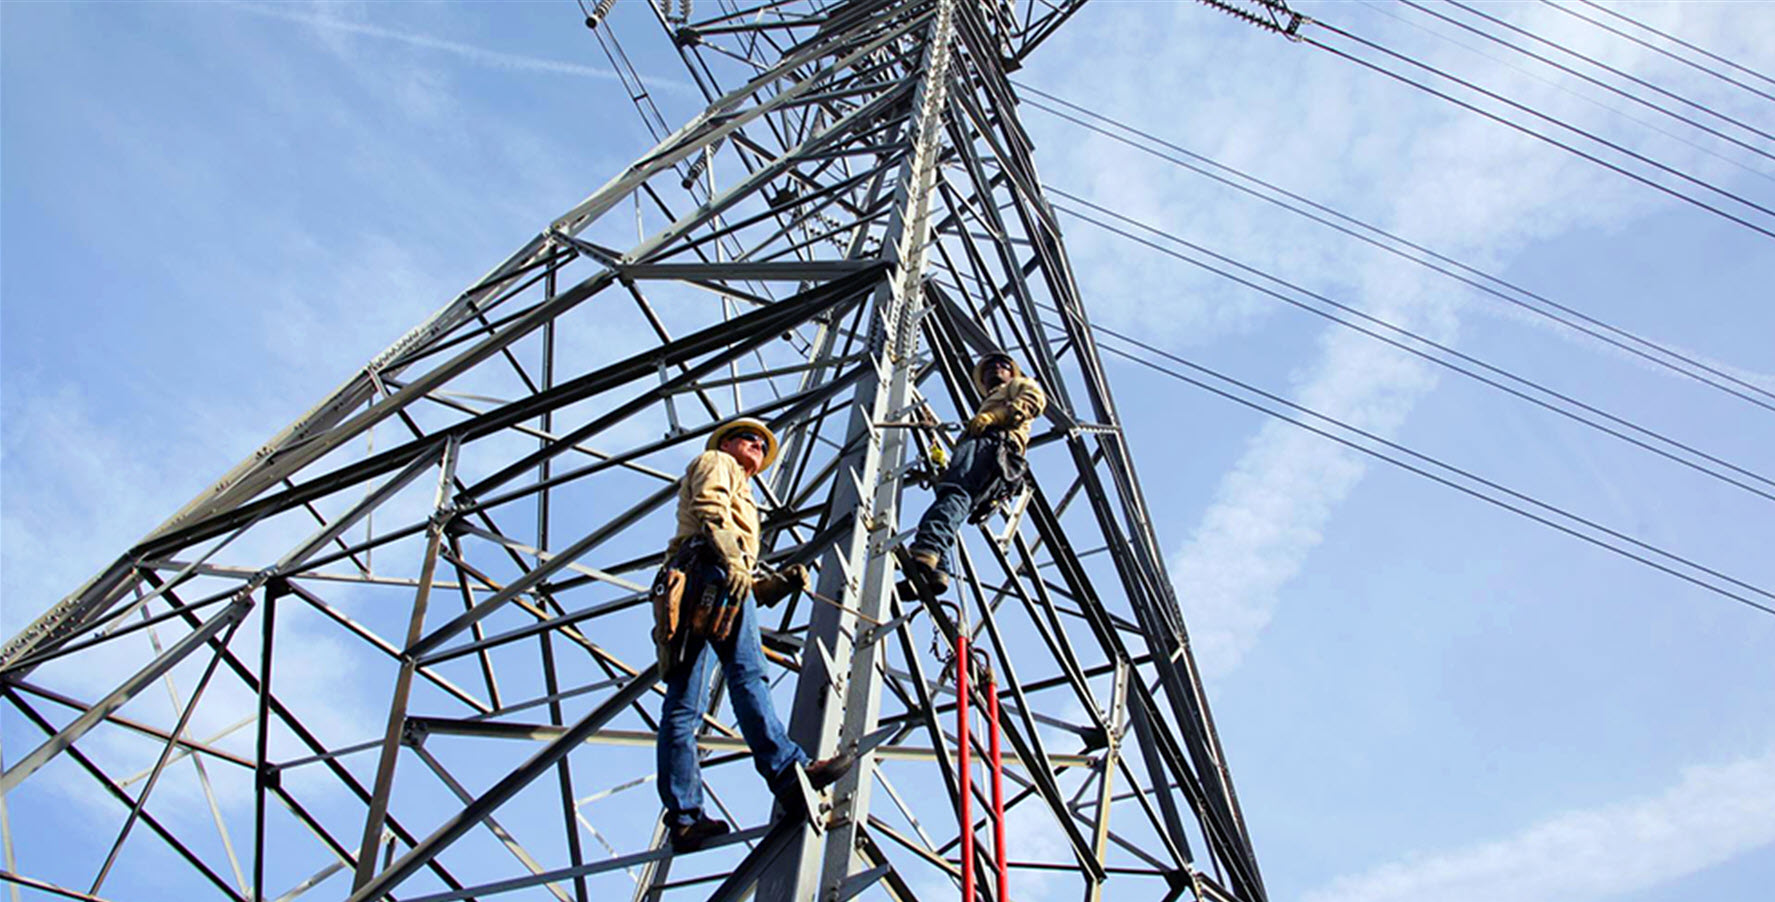 affordability rates linemen on tower image